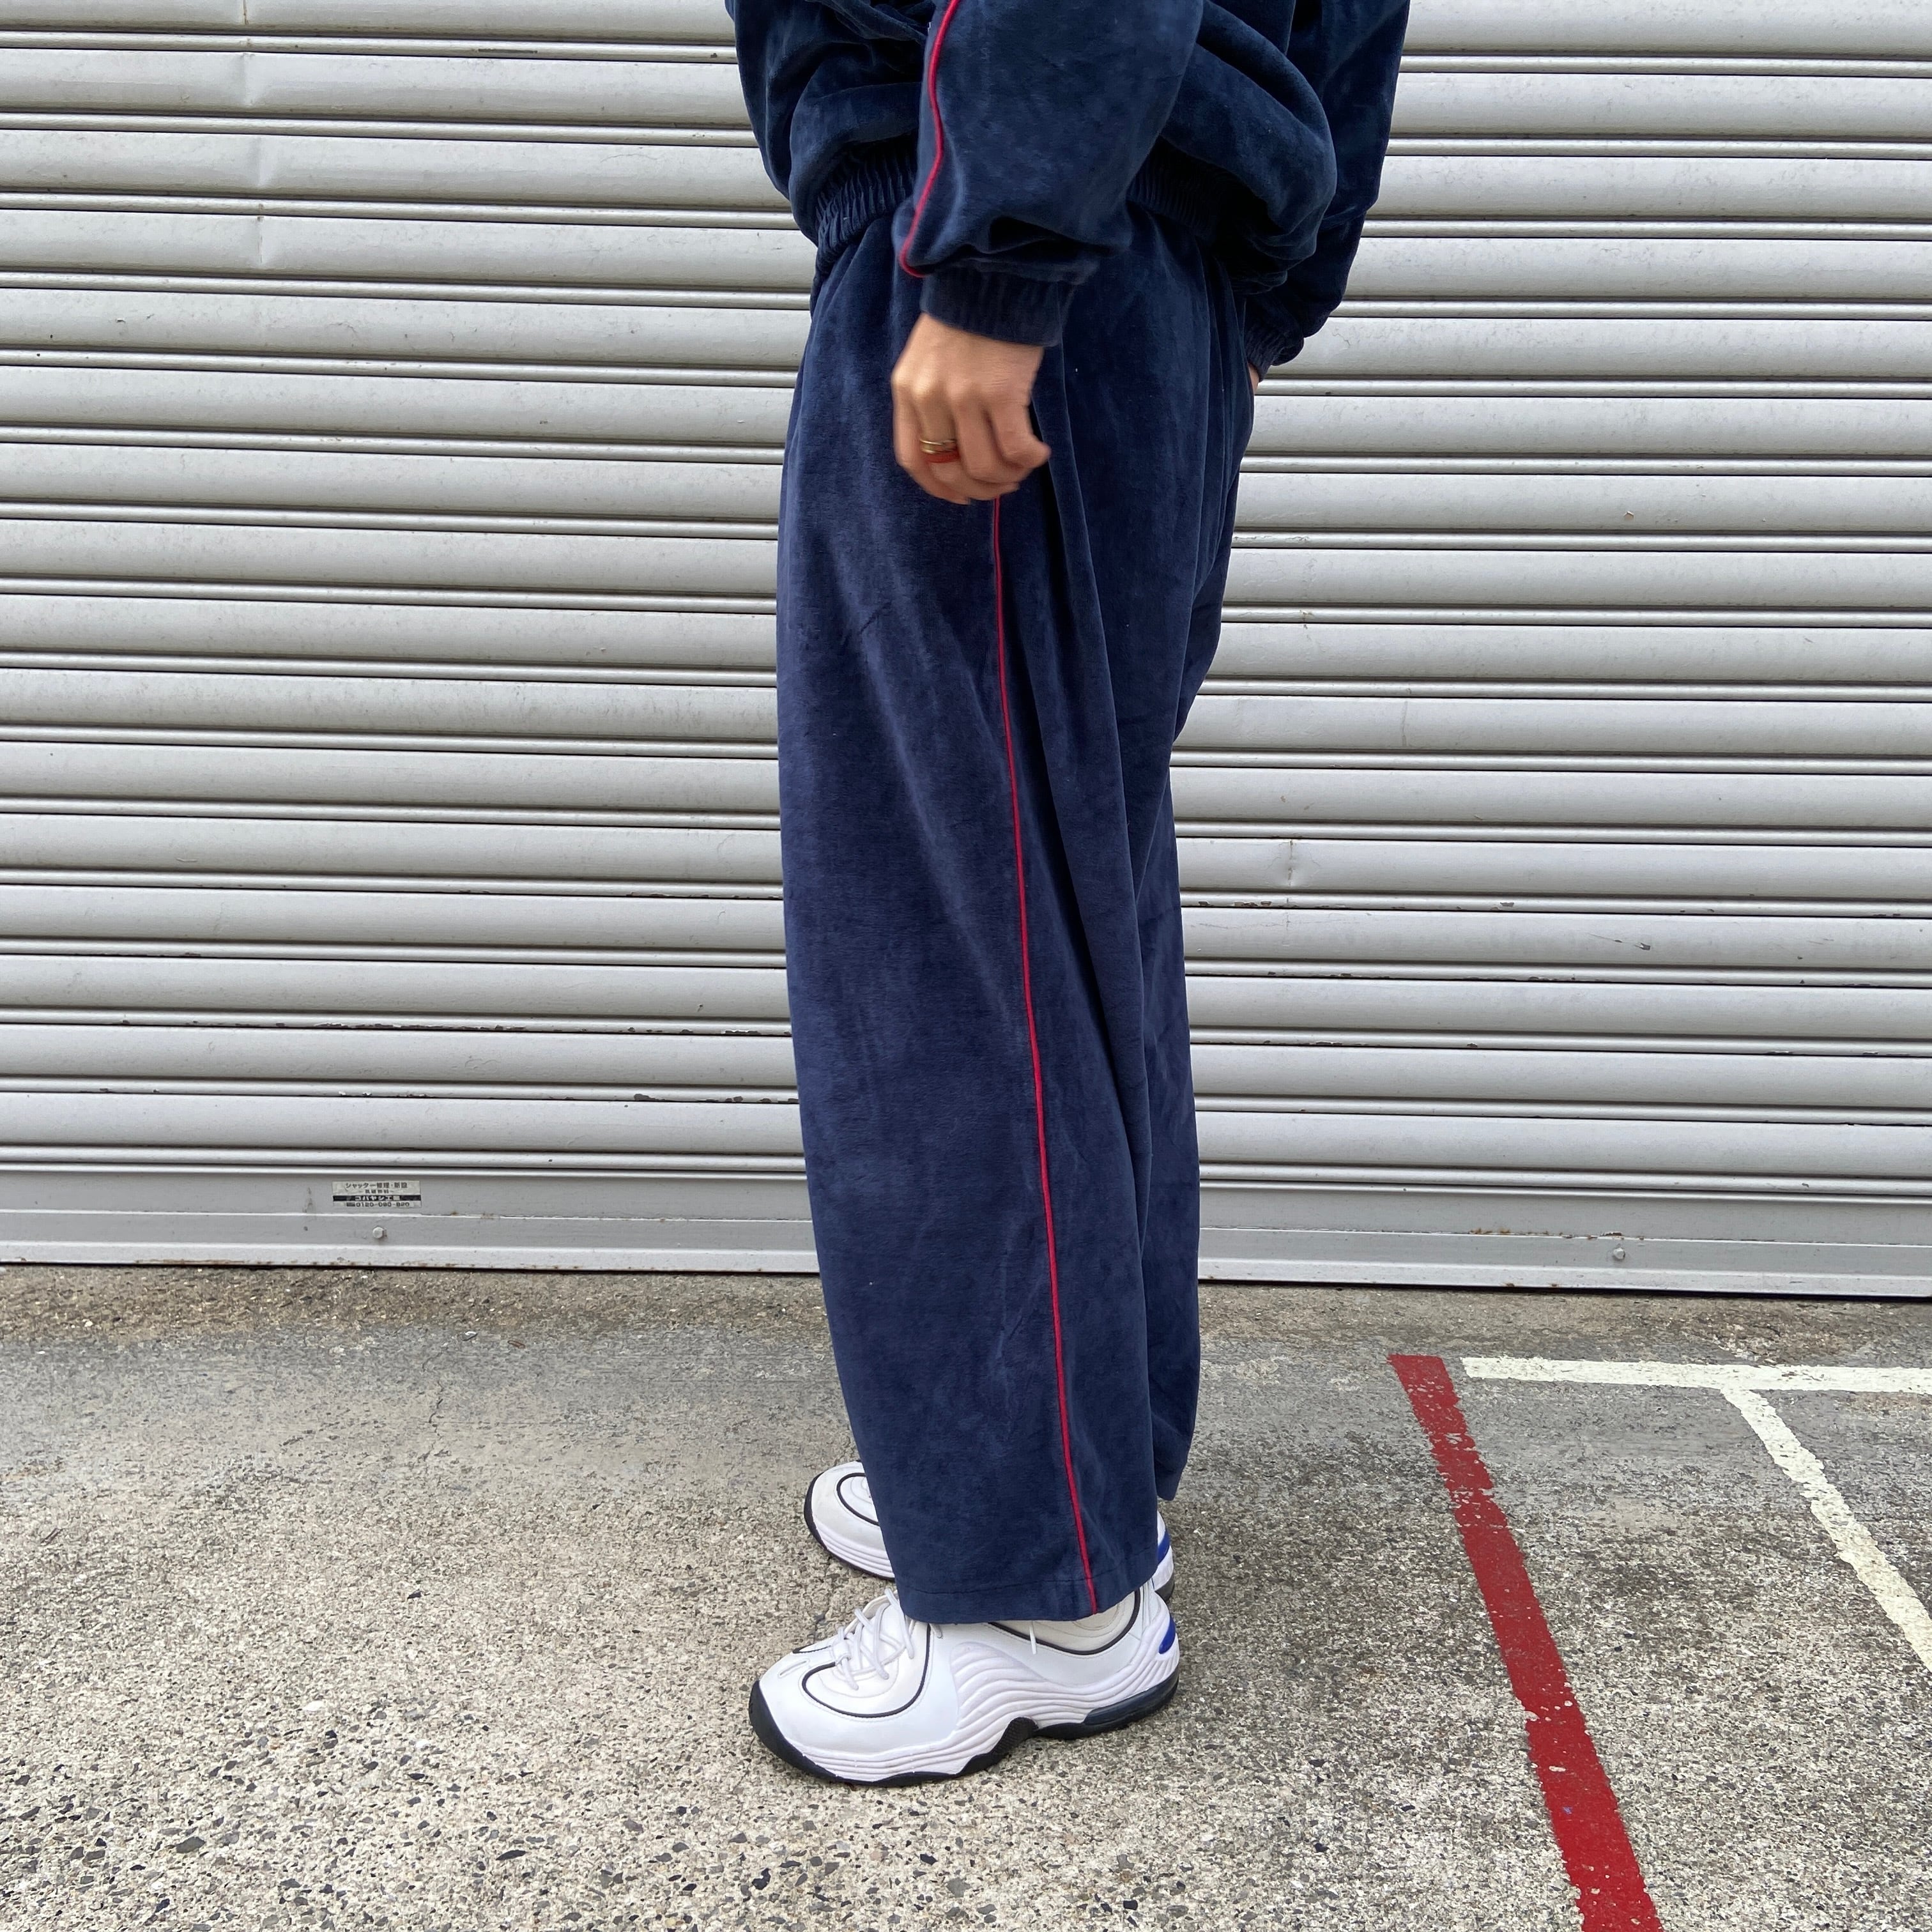 ＰＥＲＲＹ ＥＬＬＩＳ ペリーエリス ジップアップナイロンパーカー 90s